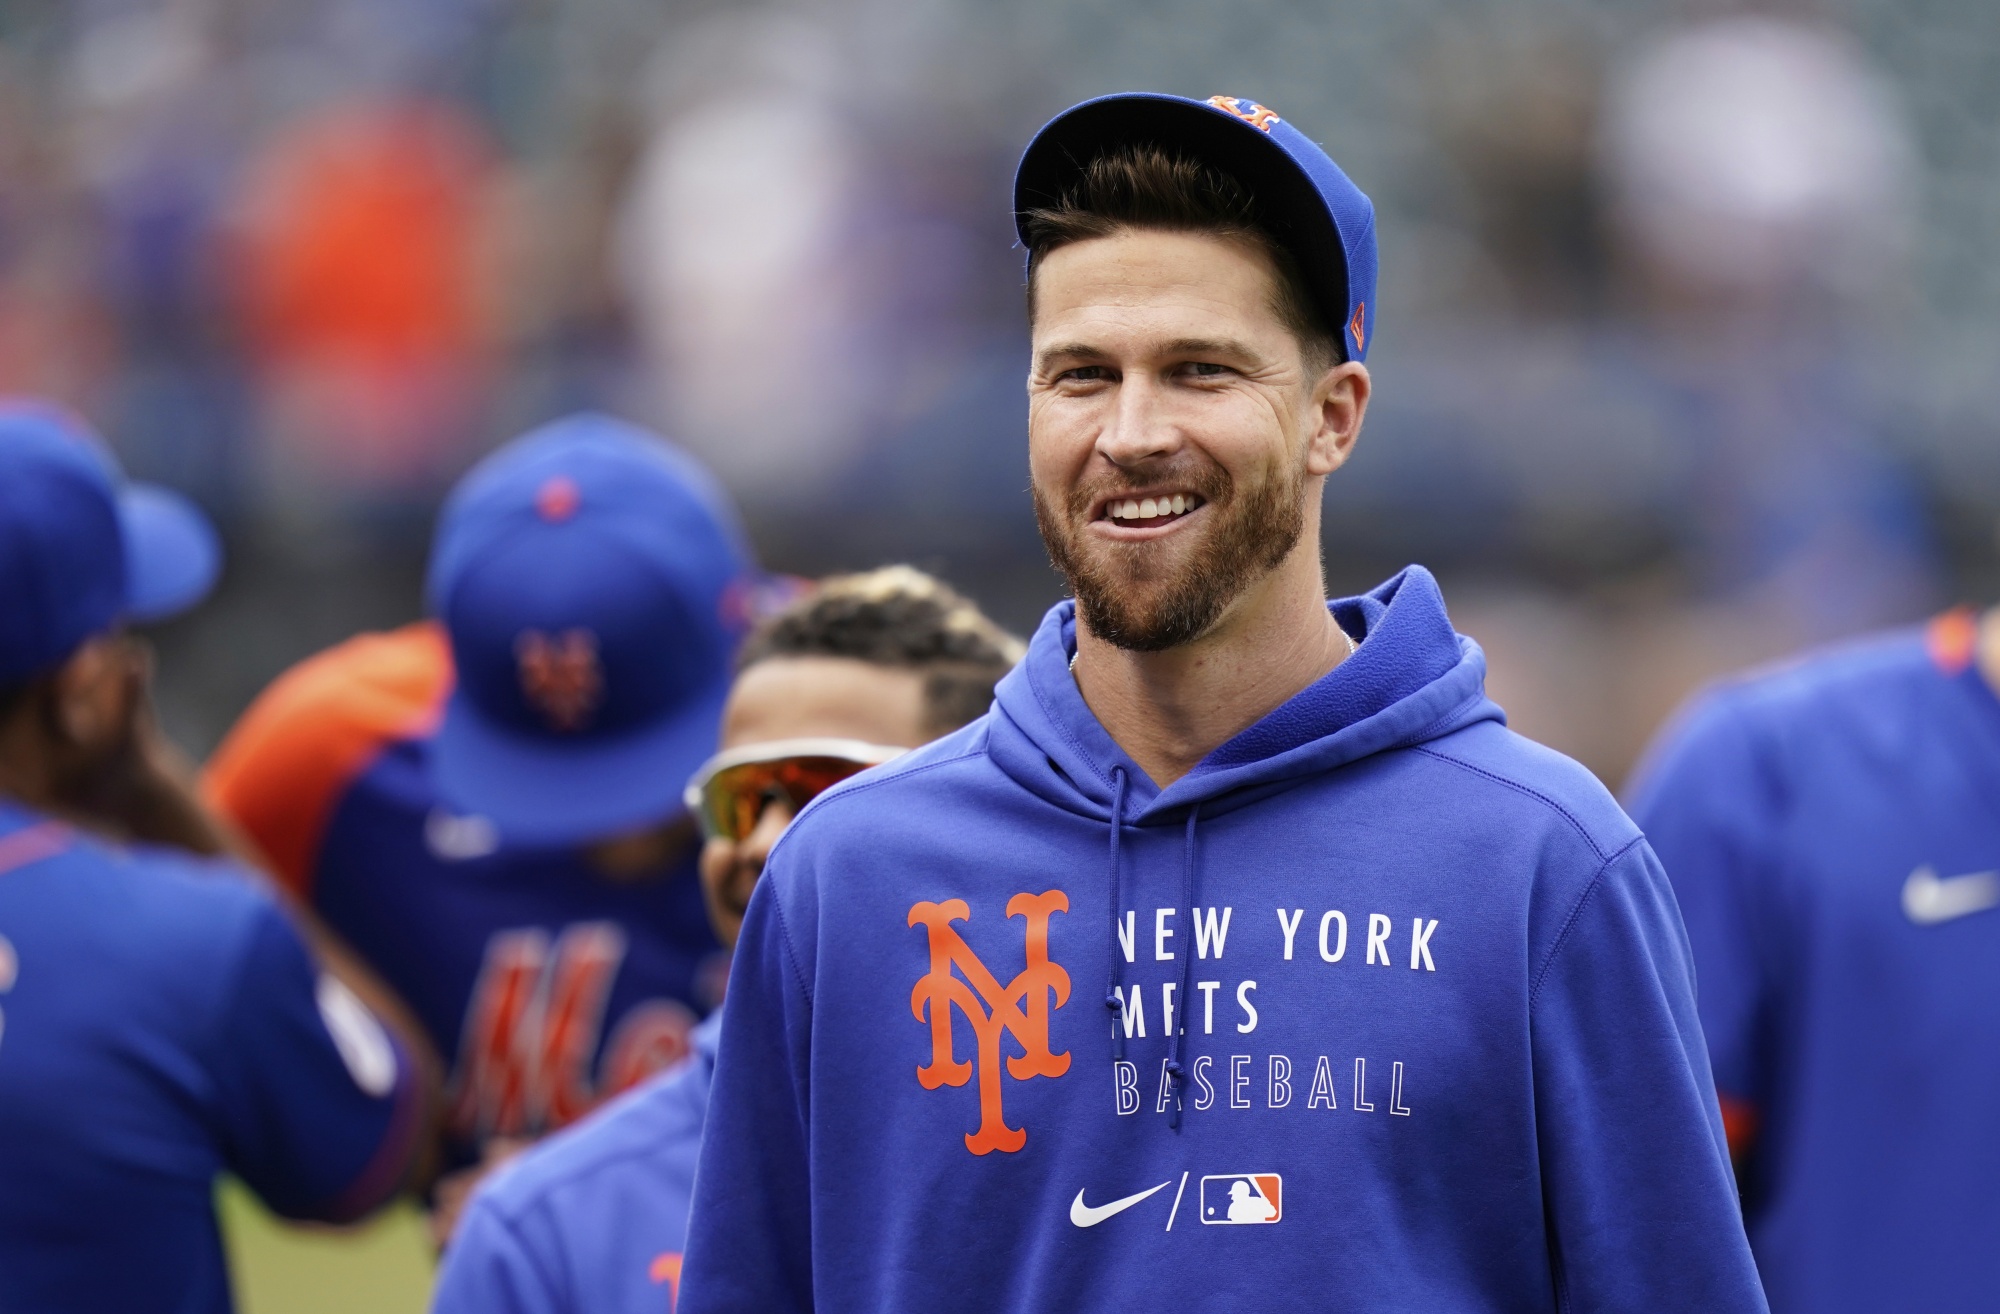 New York Mets news: Team has 2 positive COVID-19 tests, Thursday's